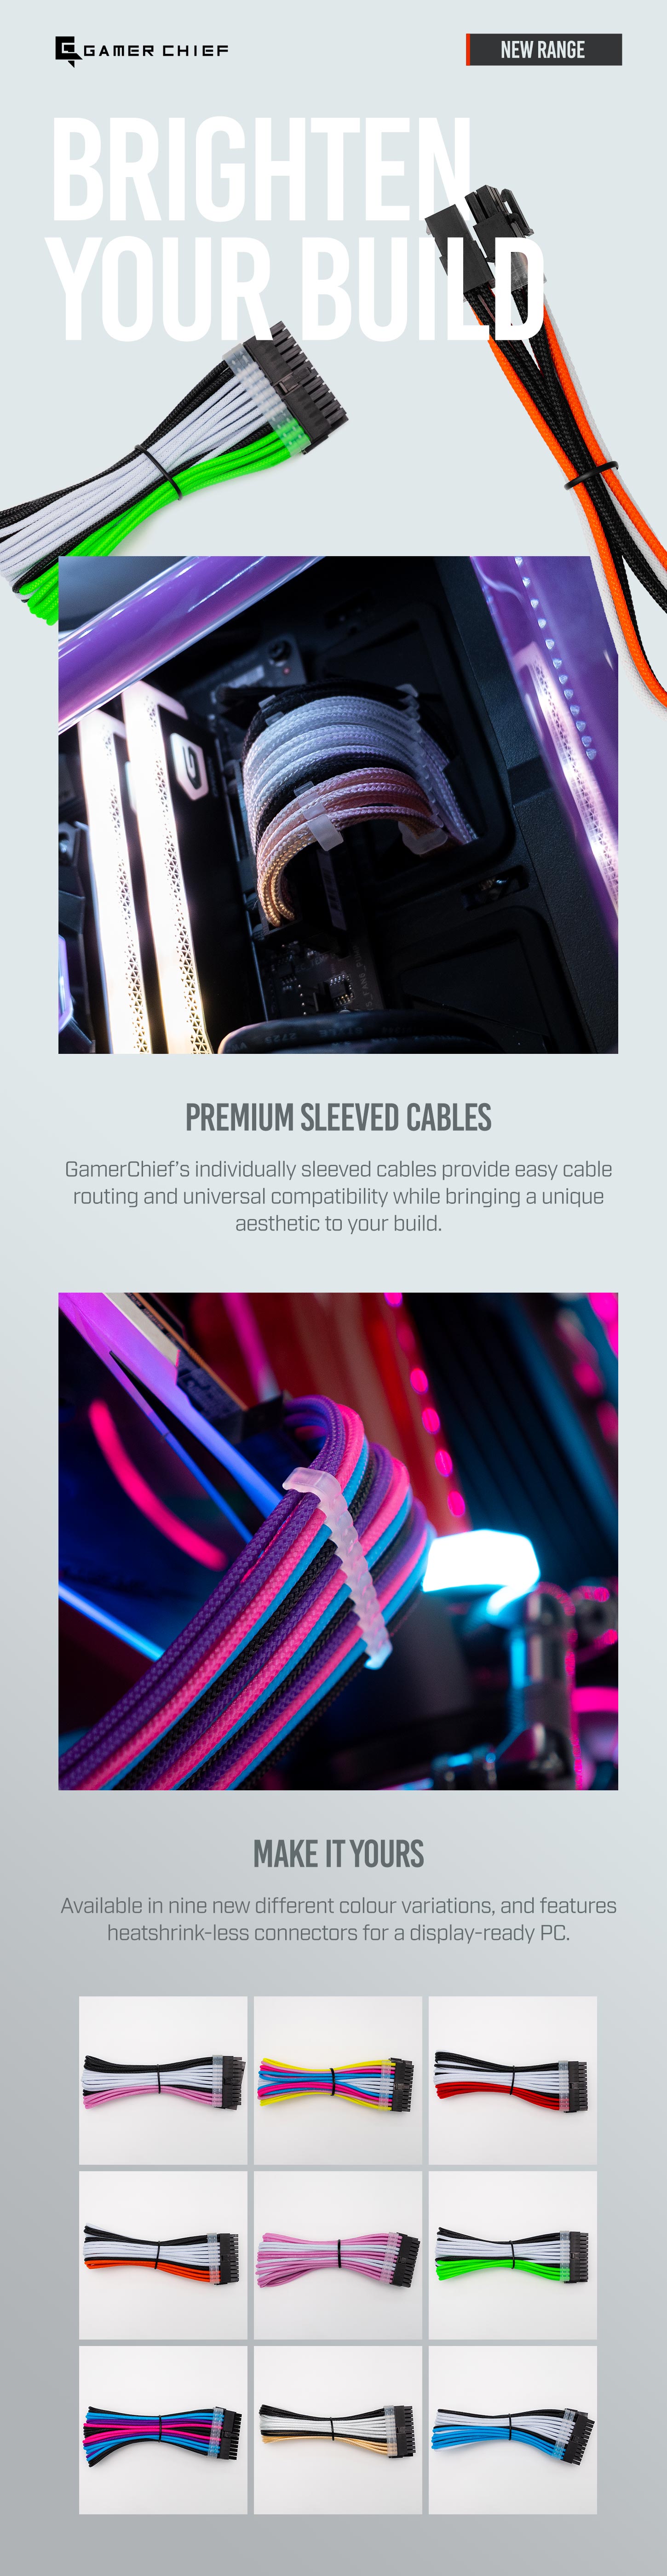 A large marketing image providing additional information about the product GamerChief Elite Series 8-Pin EPS 30cm Sleeved Extension Cable (Pink/White) - Additional alt info not provided